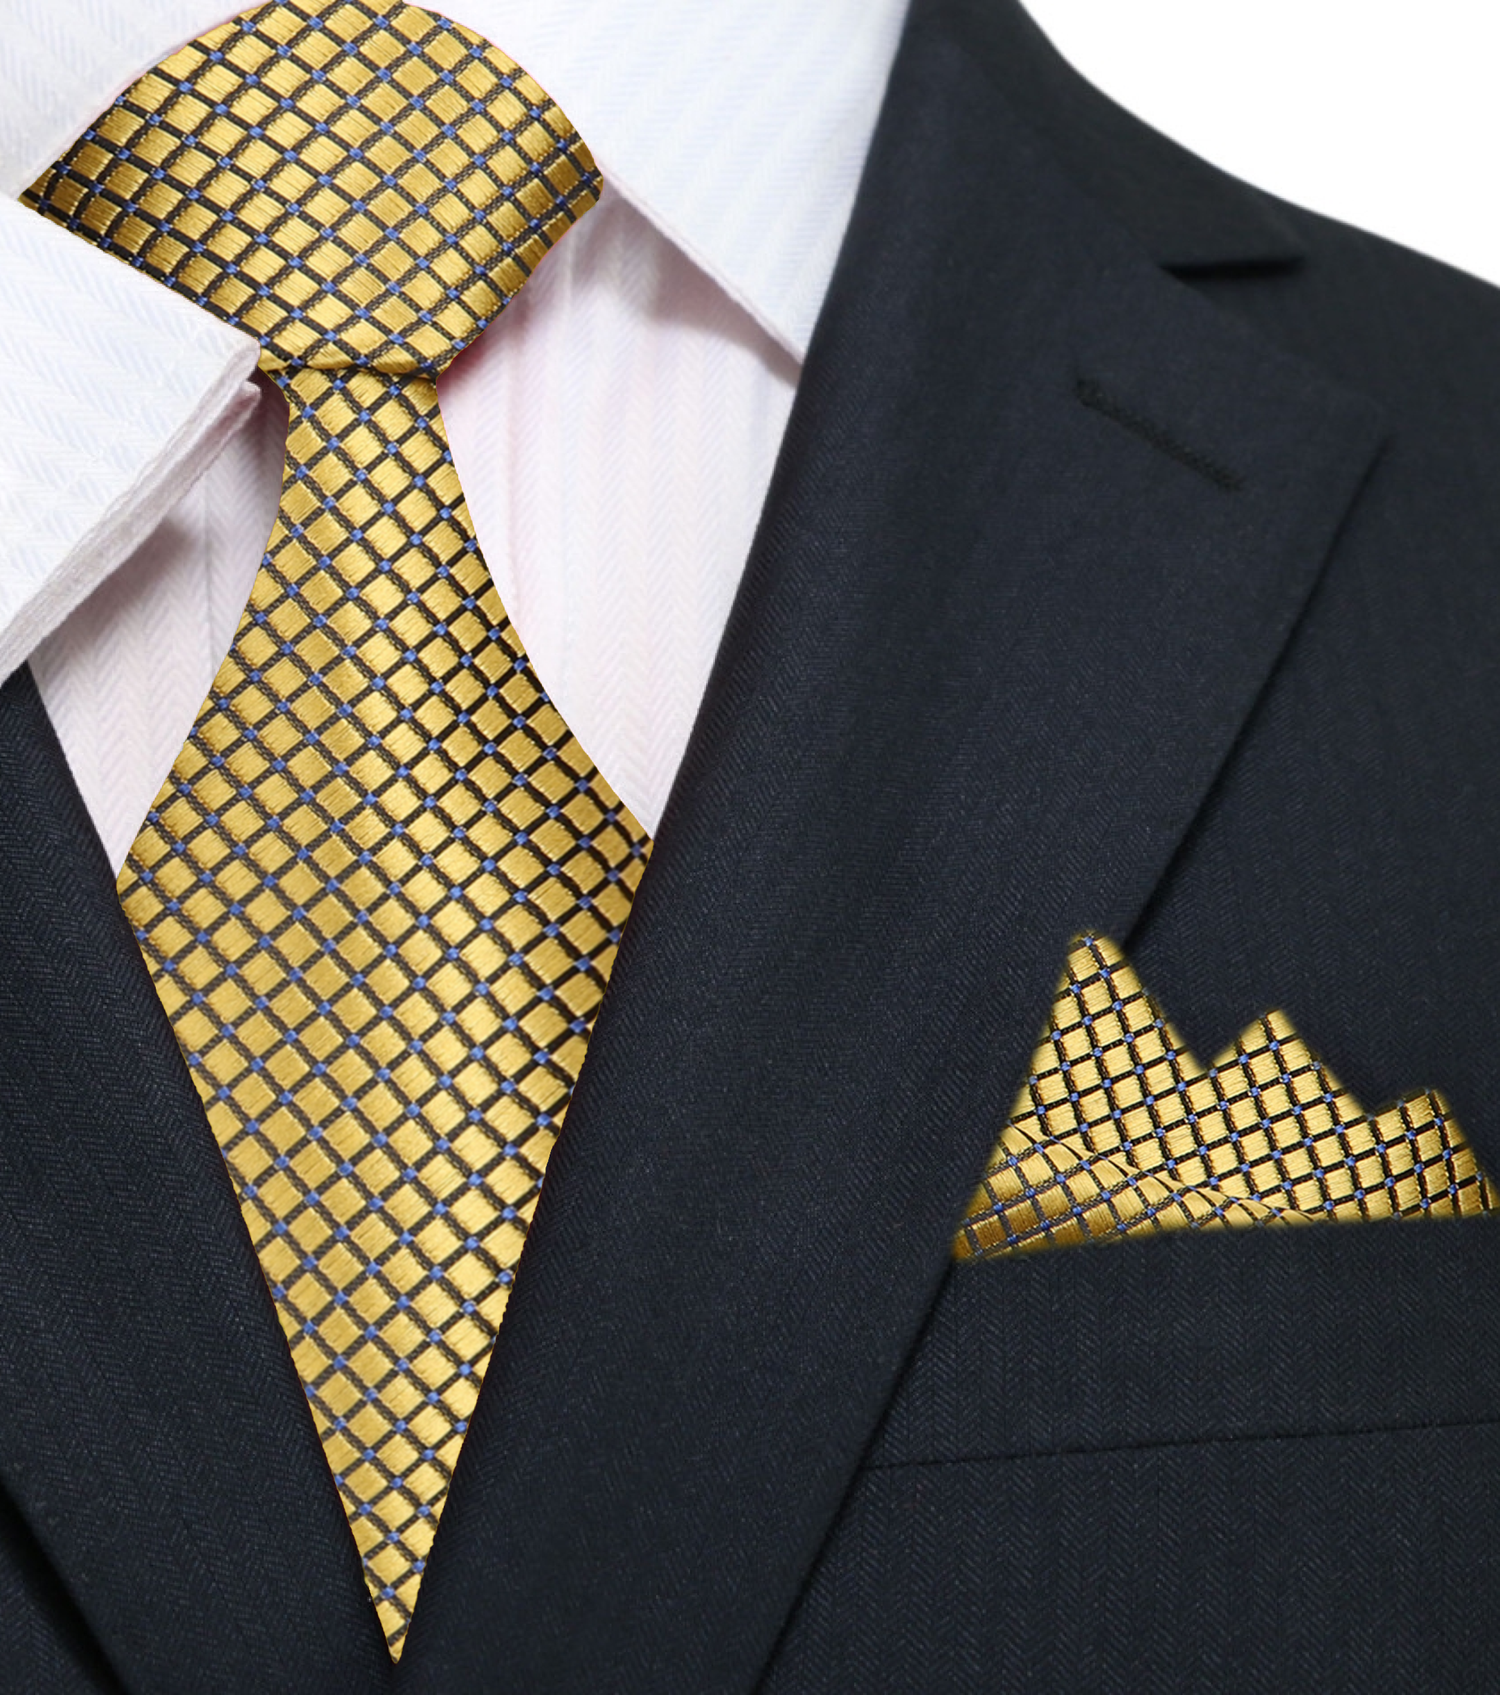 Main View: Gold Geometric Tie and Square